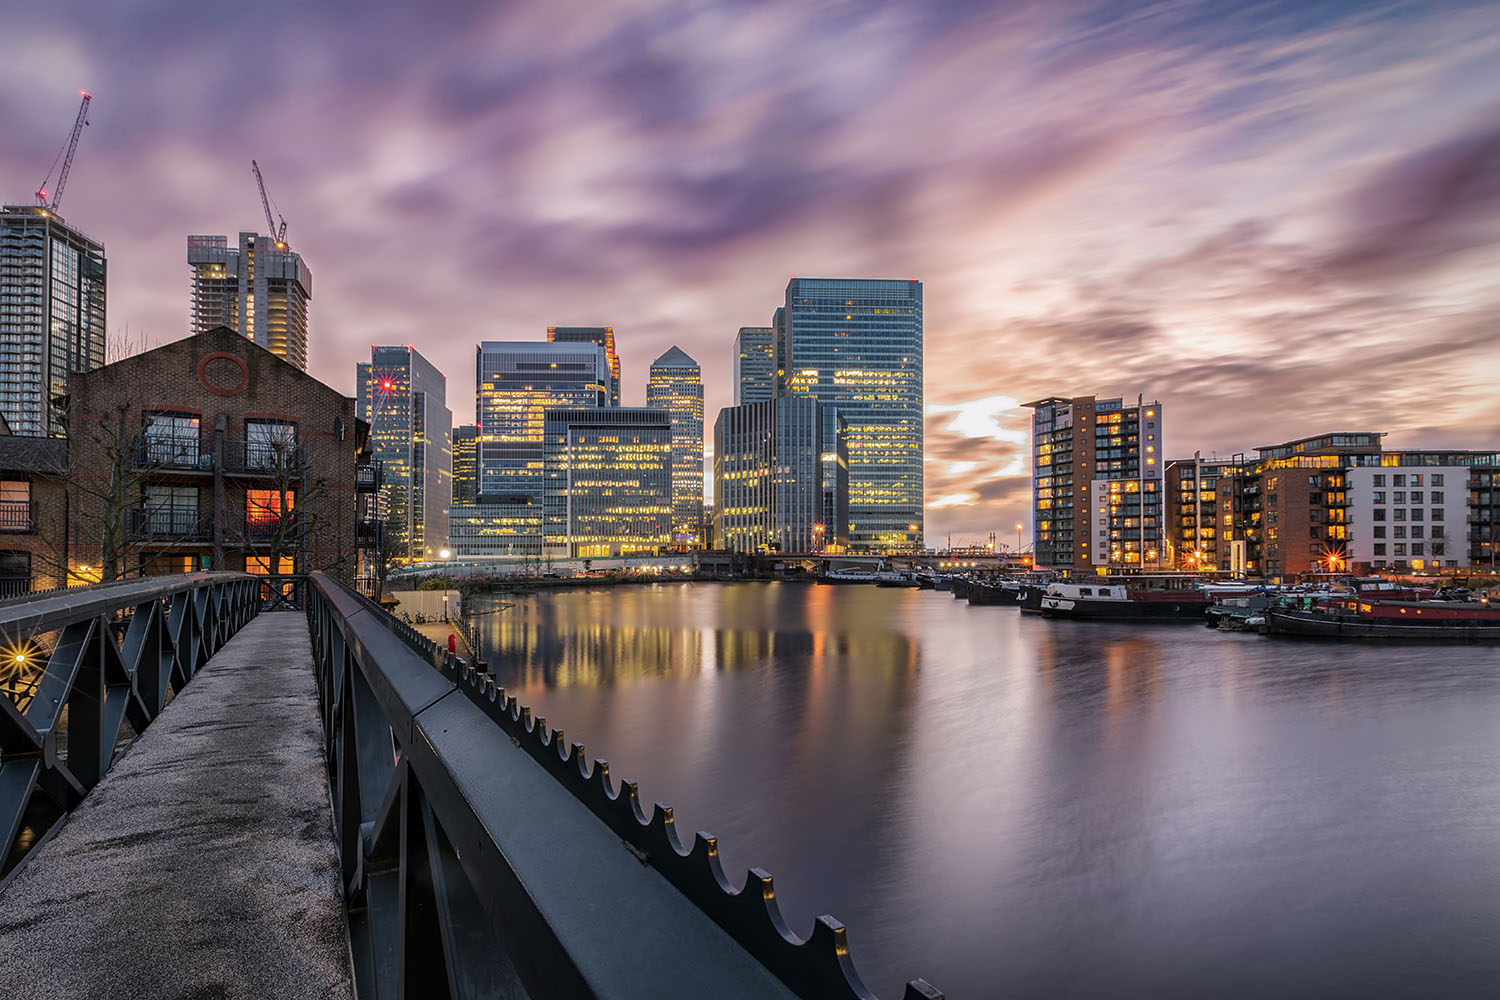 london docklands case study geography